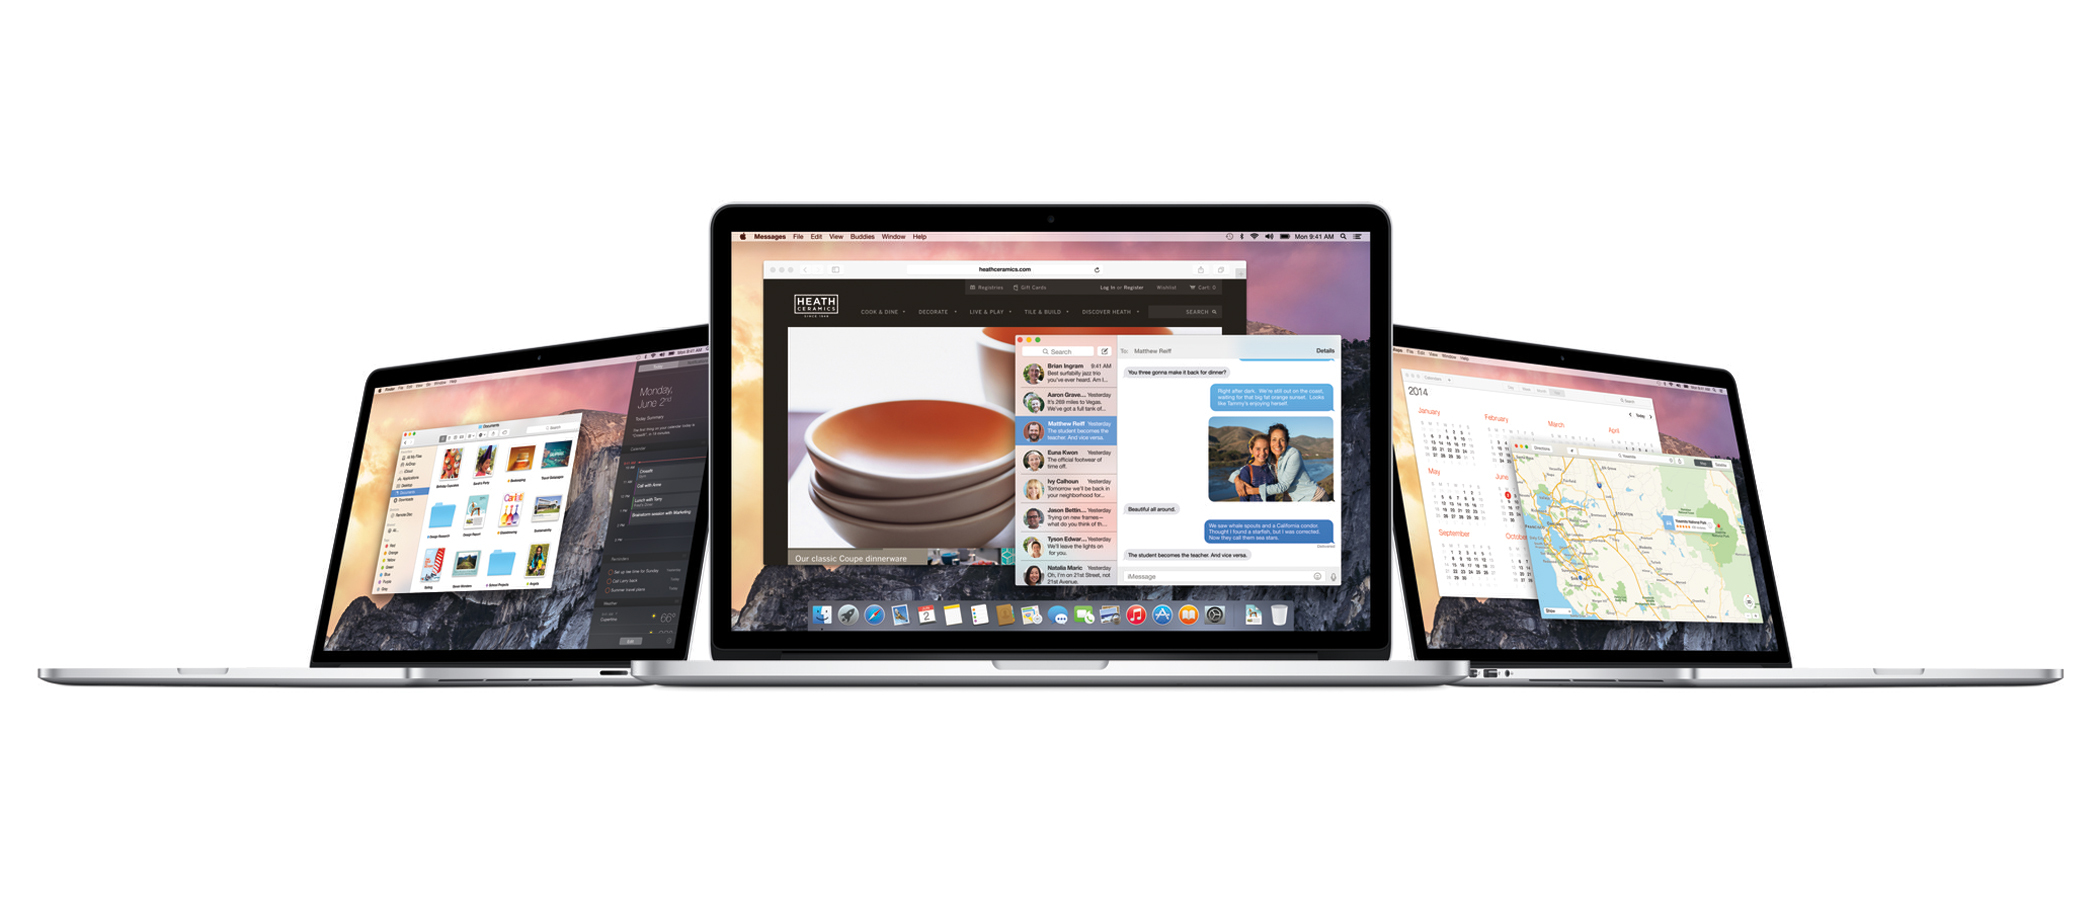 Mac OS X Yosemite hands-on preview | Stuff